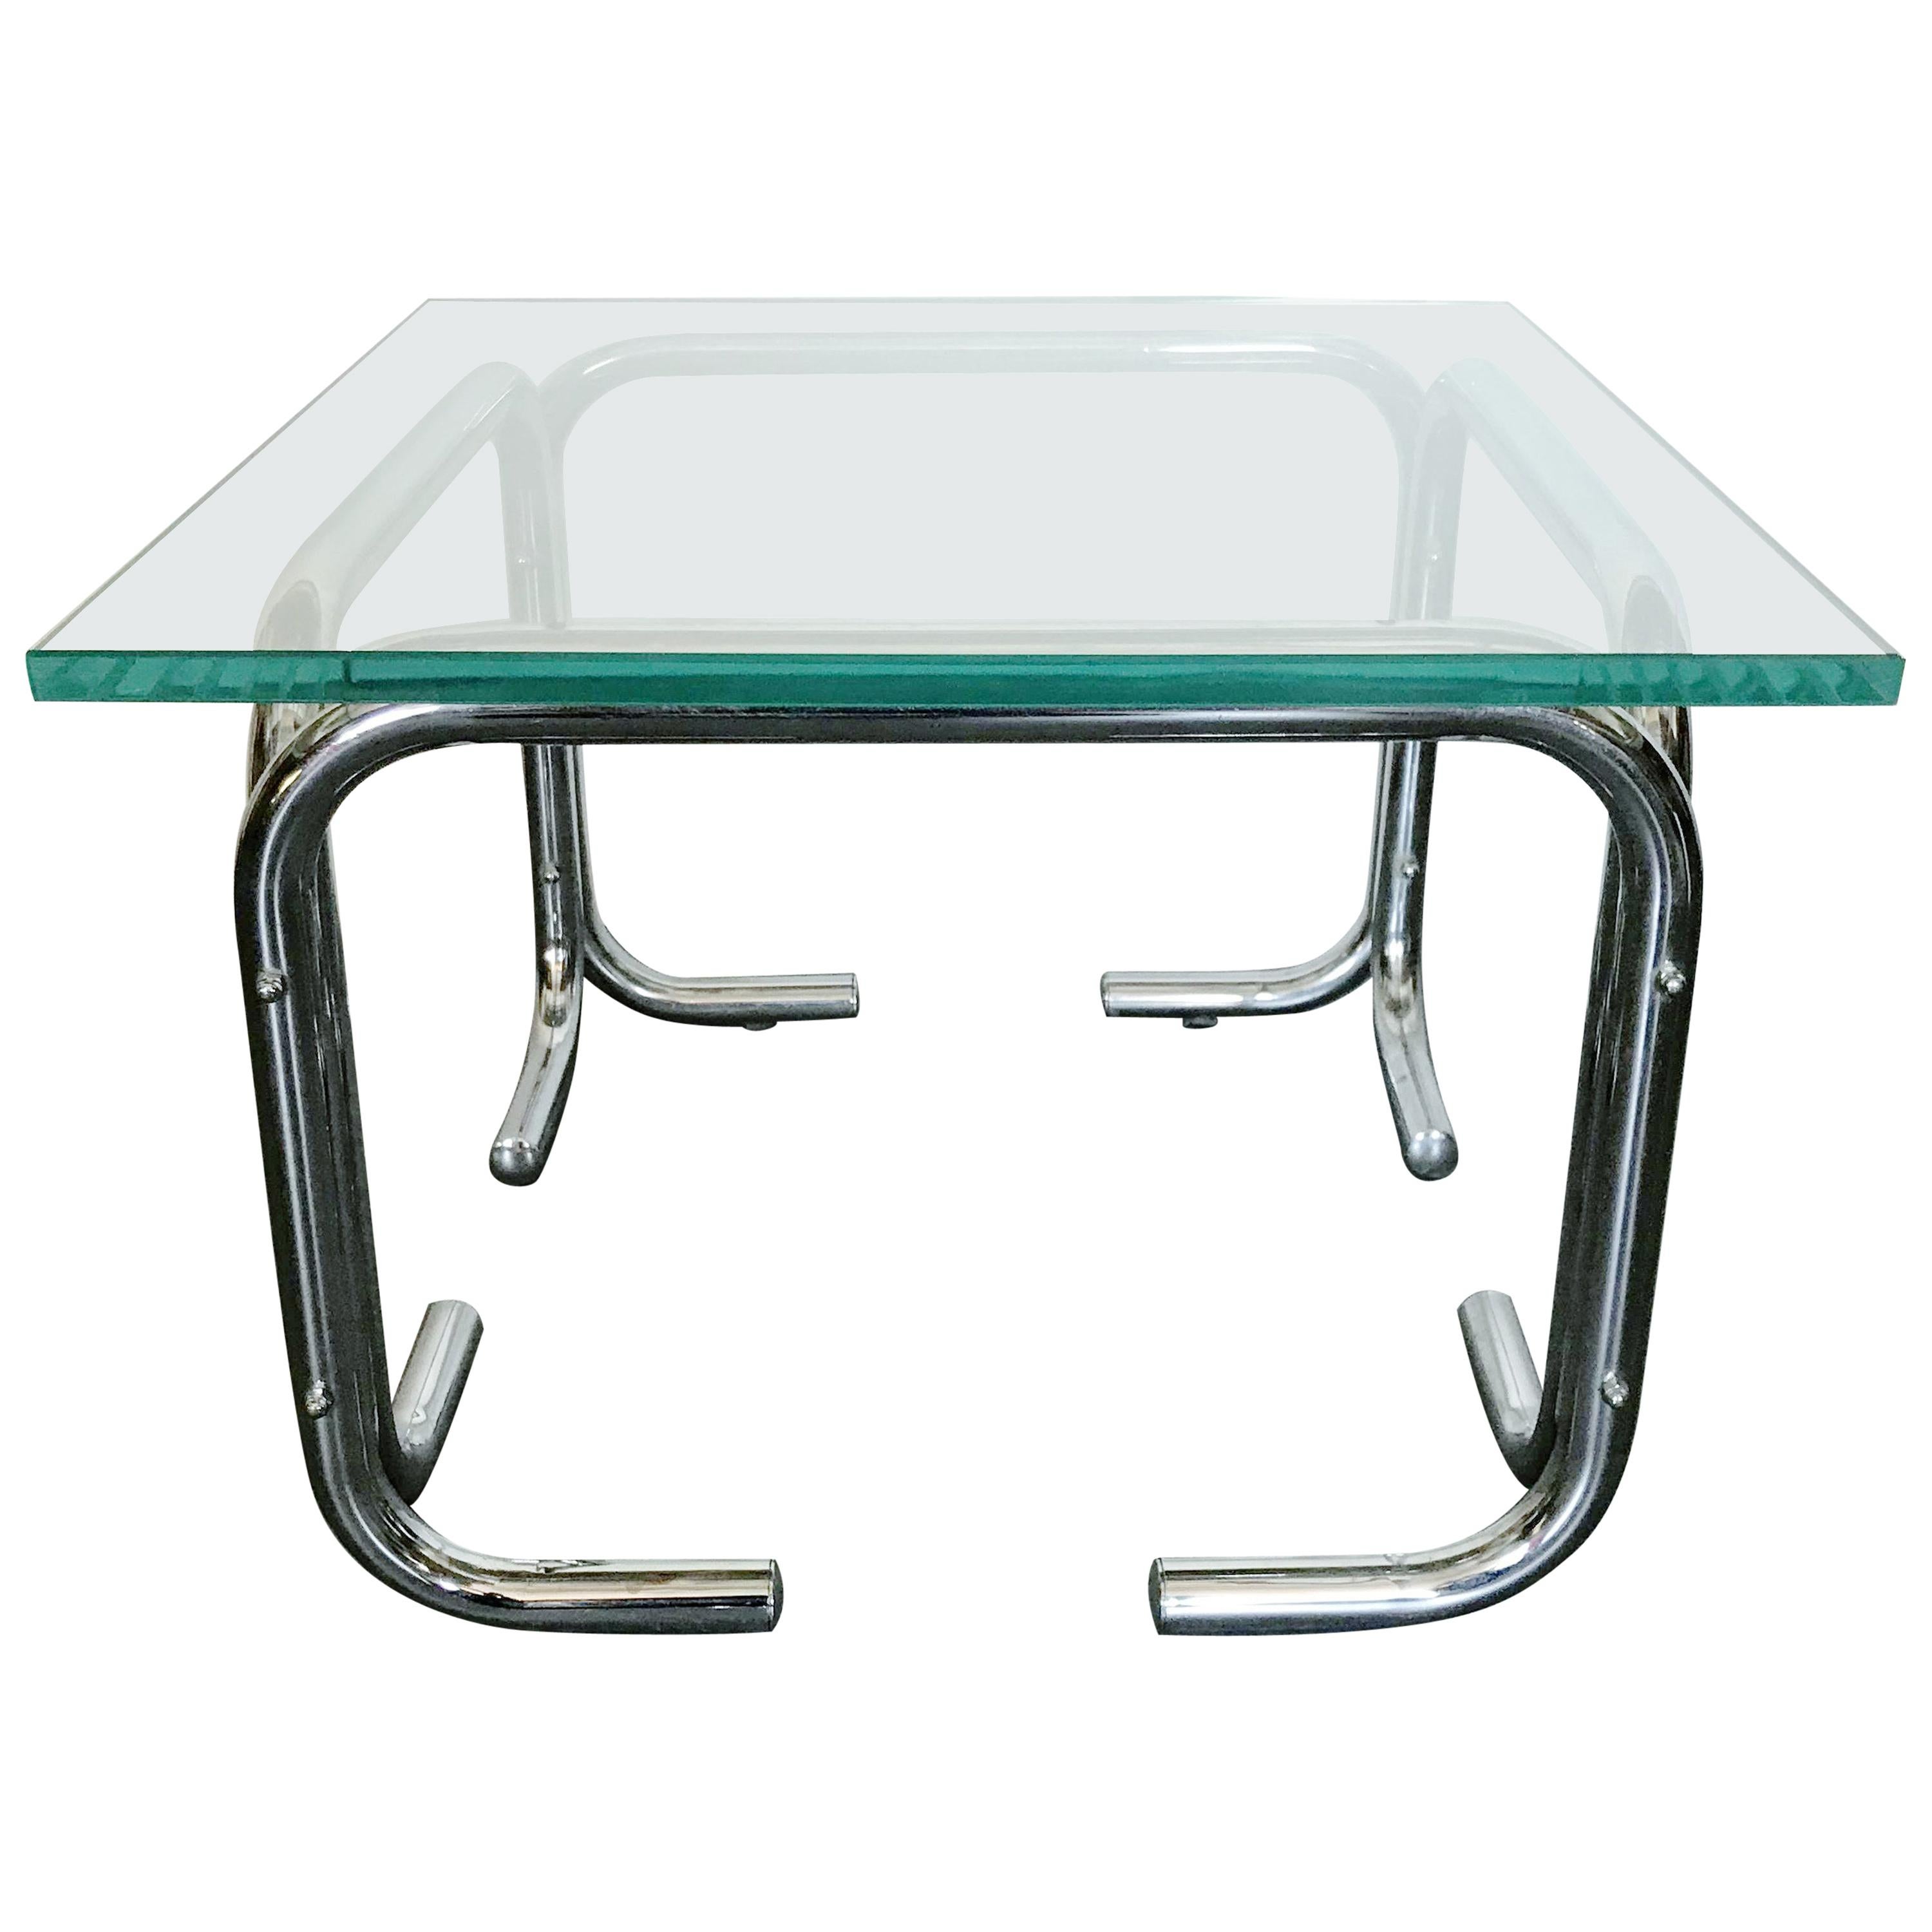 Chrome and Glass Side Table FINAL CLEARANCE SALE